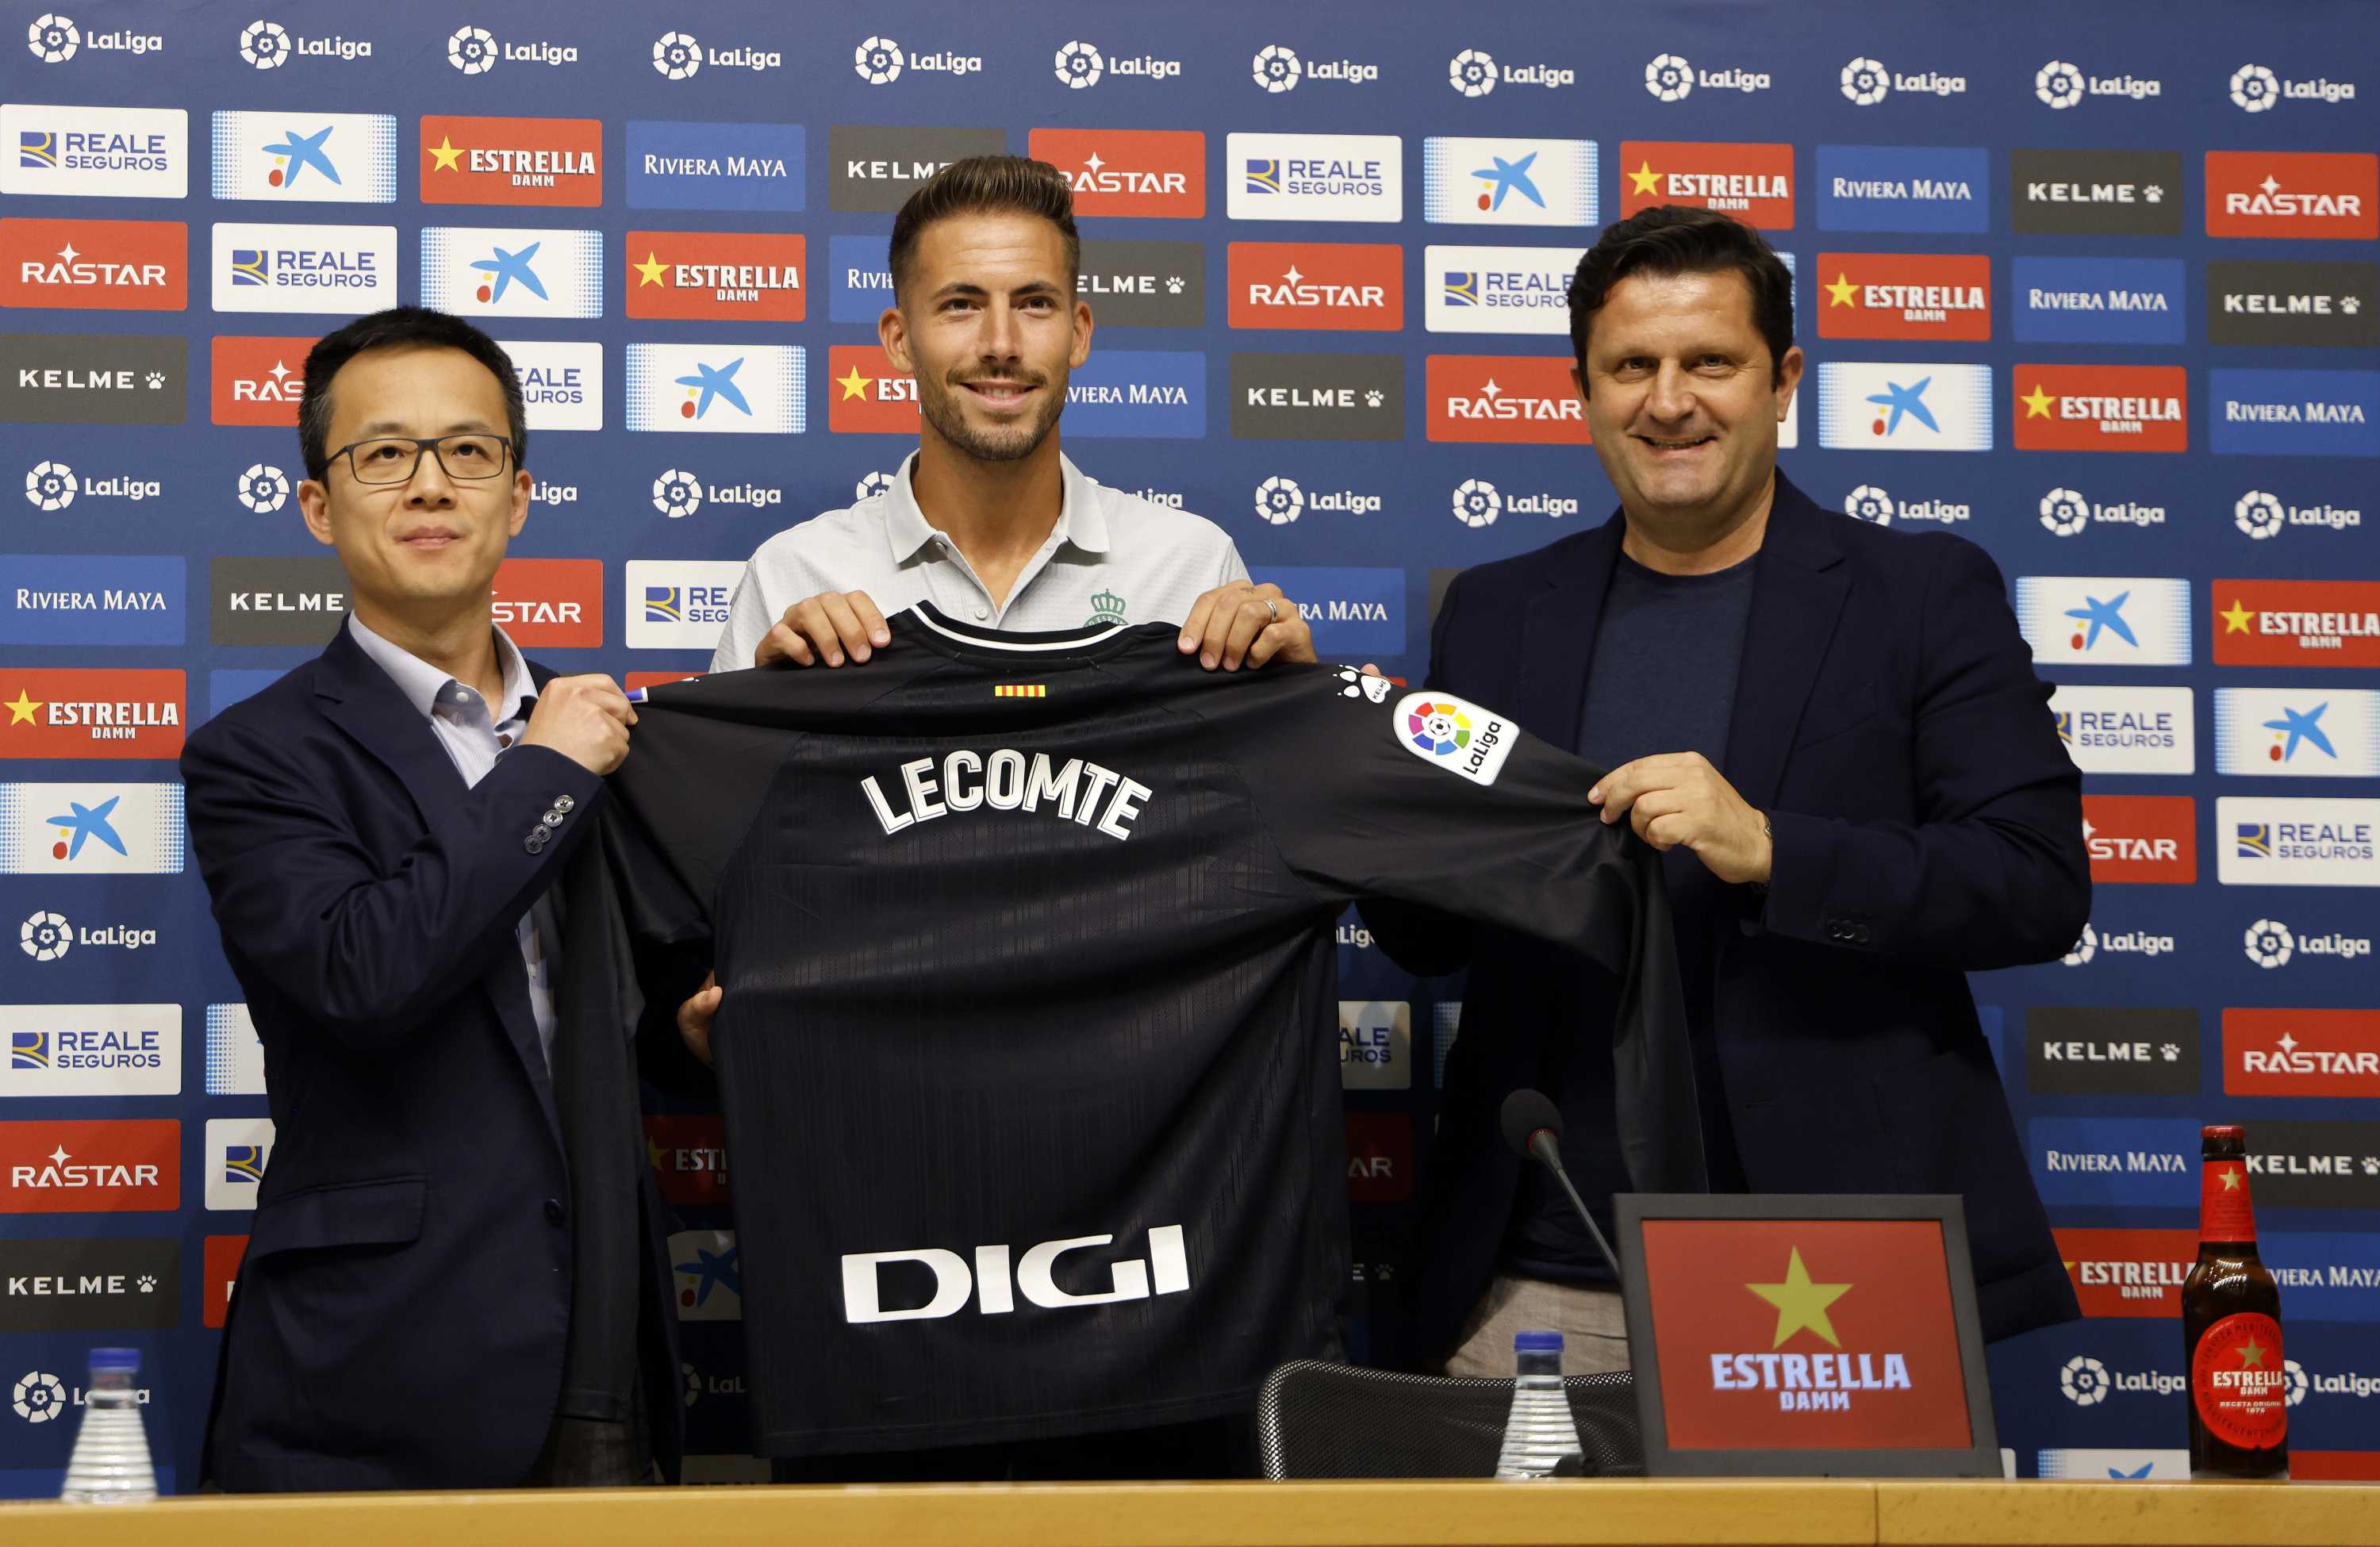 Lecomte: "The possibility to progress was key to my decision"